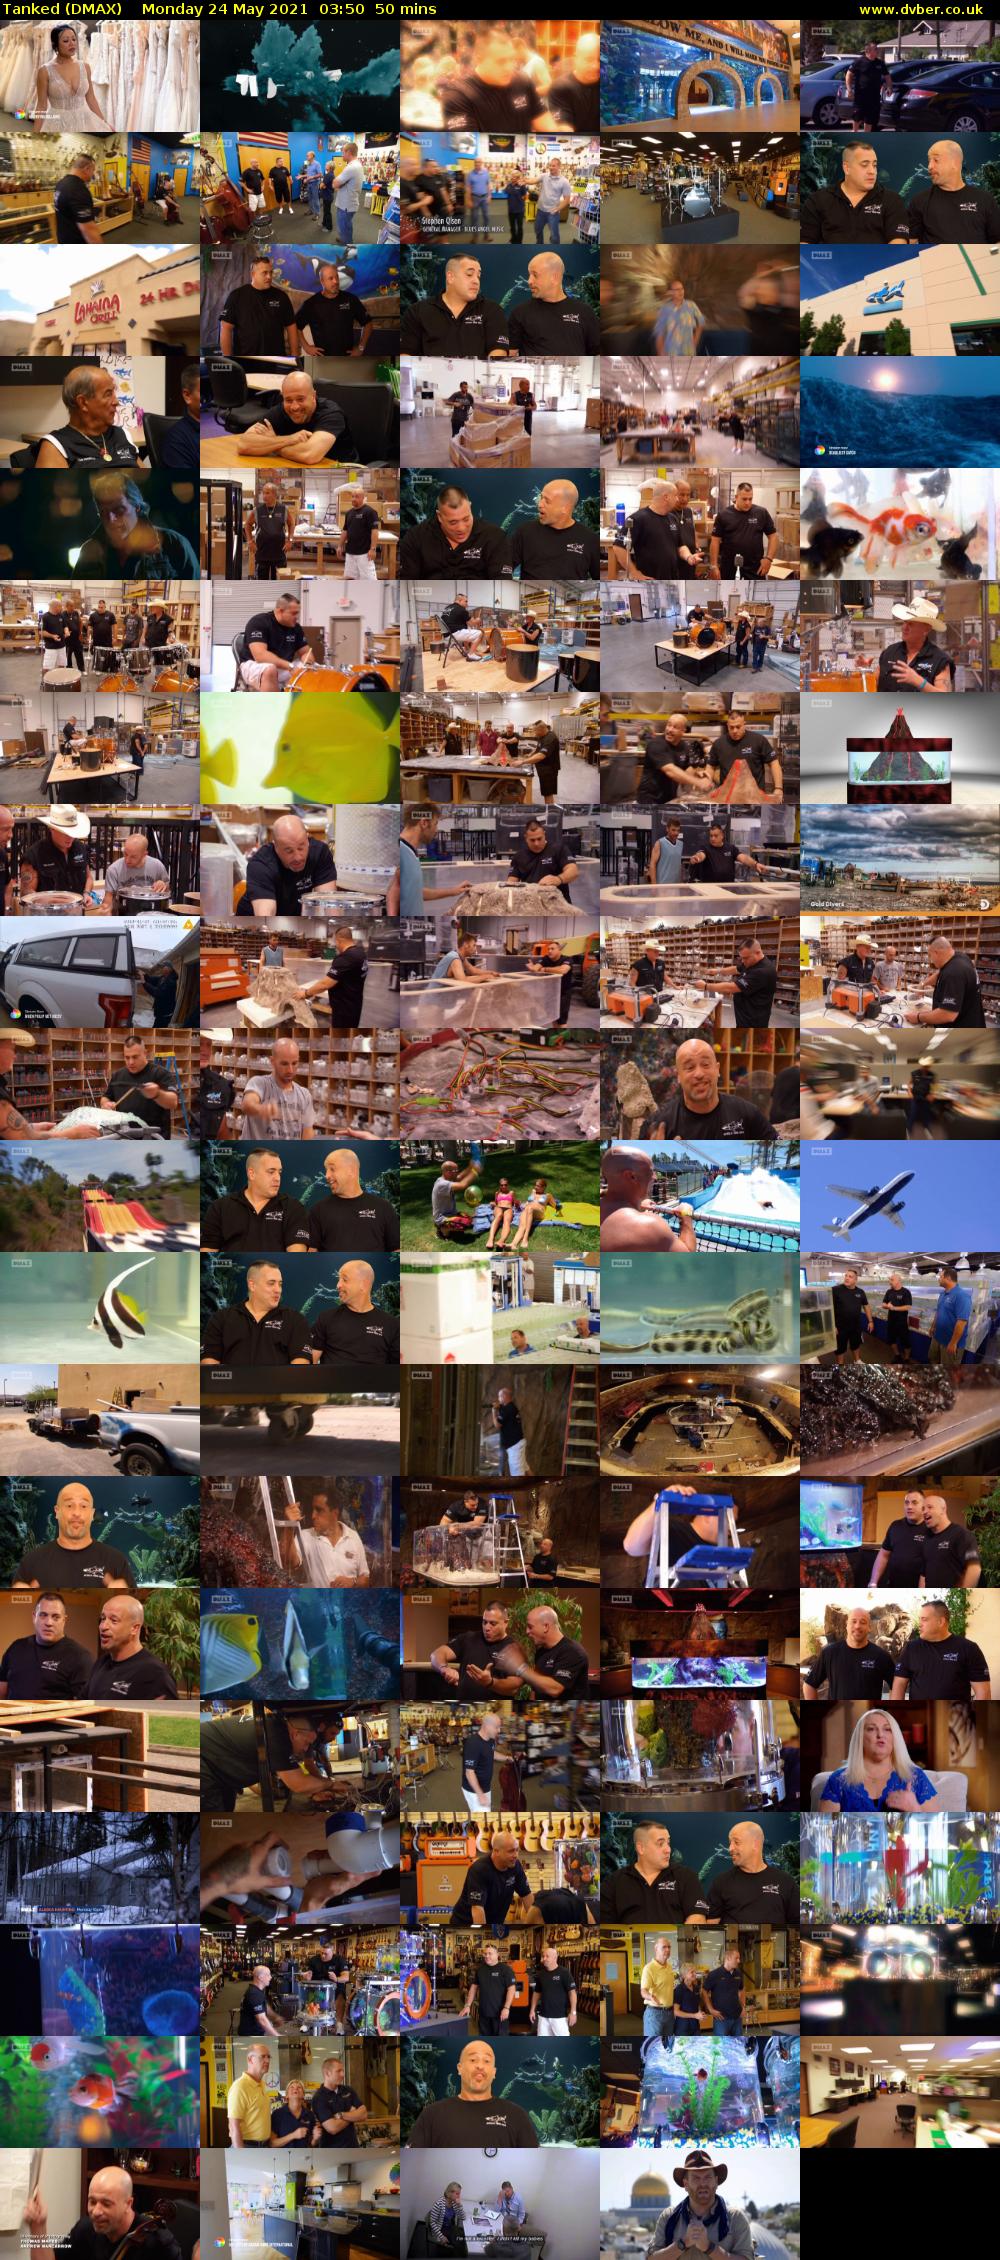 Tanked (DMAX) Monday 24 May 2021 03:50 - 04:40